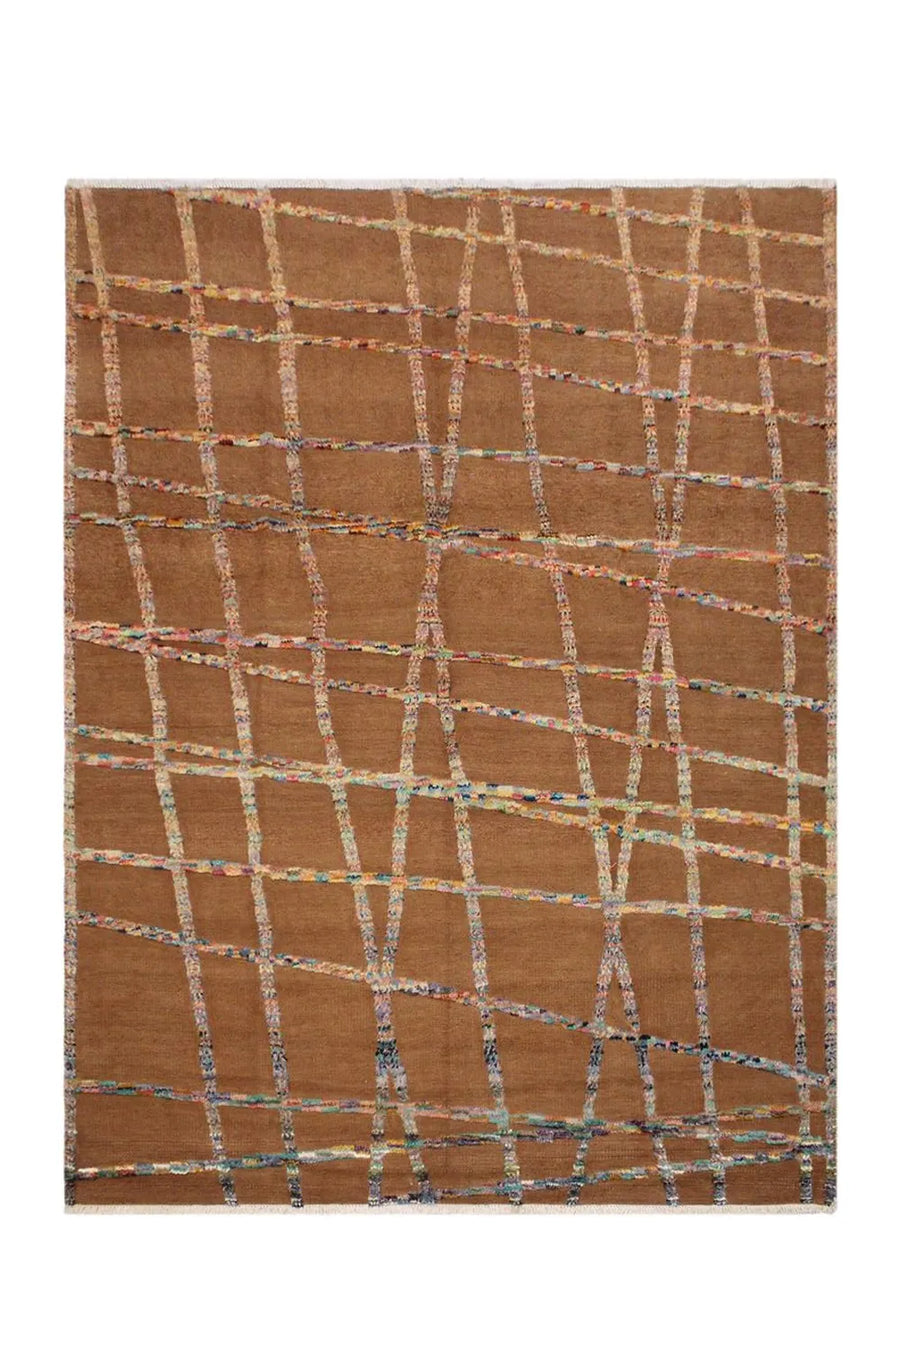 Handmade brown abstract rug with a modern earthy rainbow pattern.